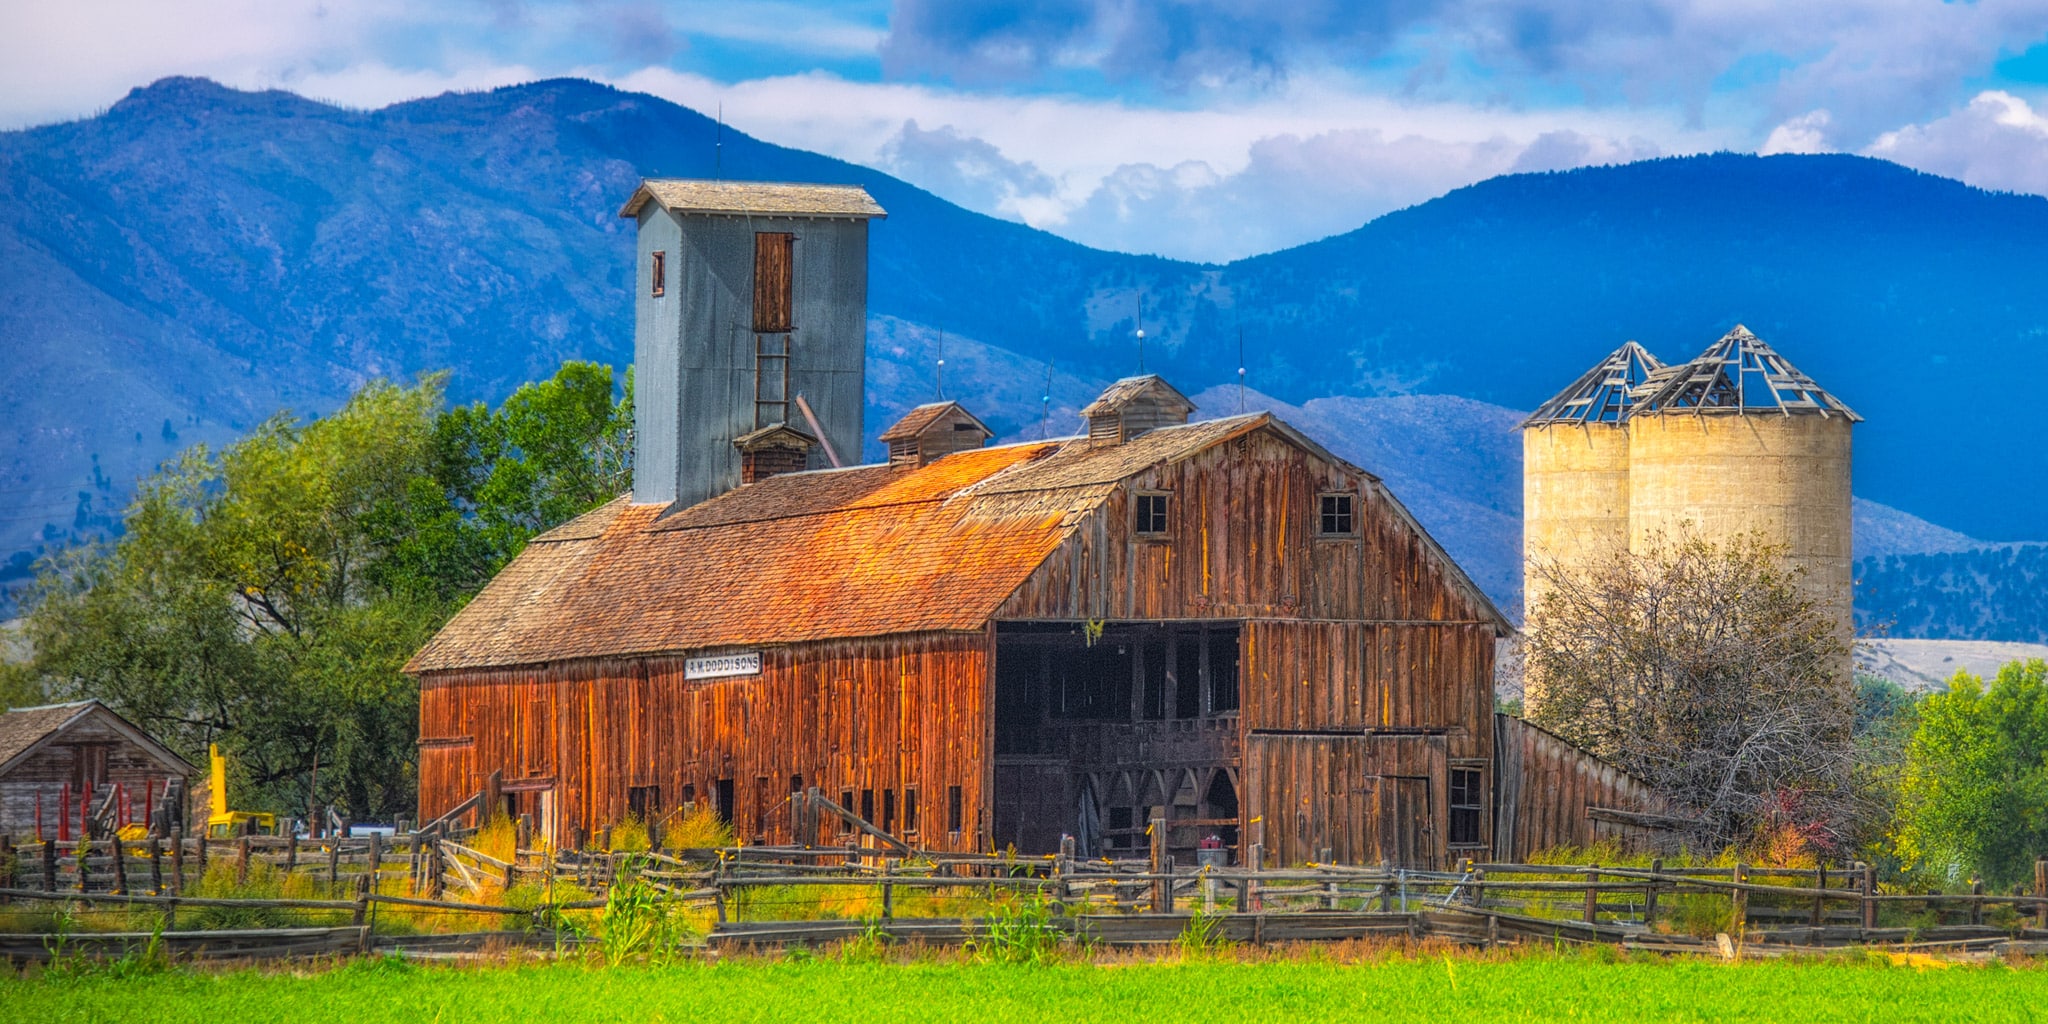 This old barn with solos and elevator is located on Niwot Road off the Diagonal Highway in Boulder, Colorado.